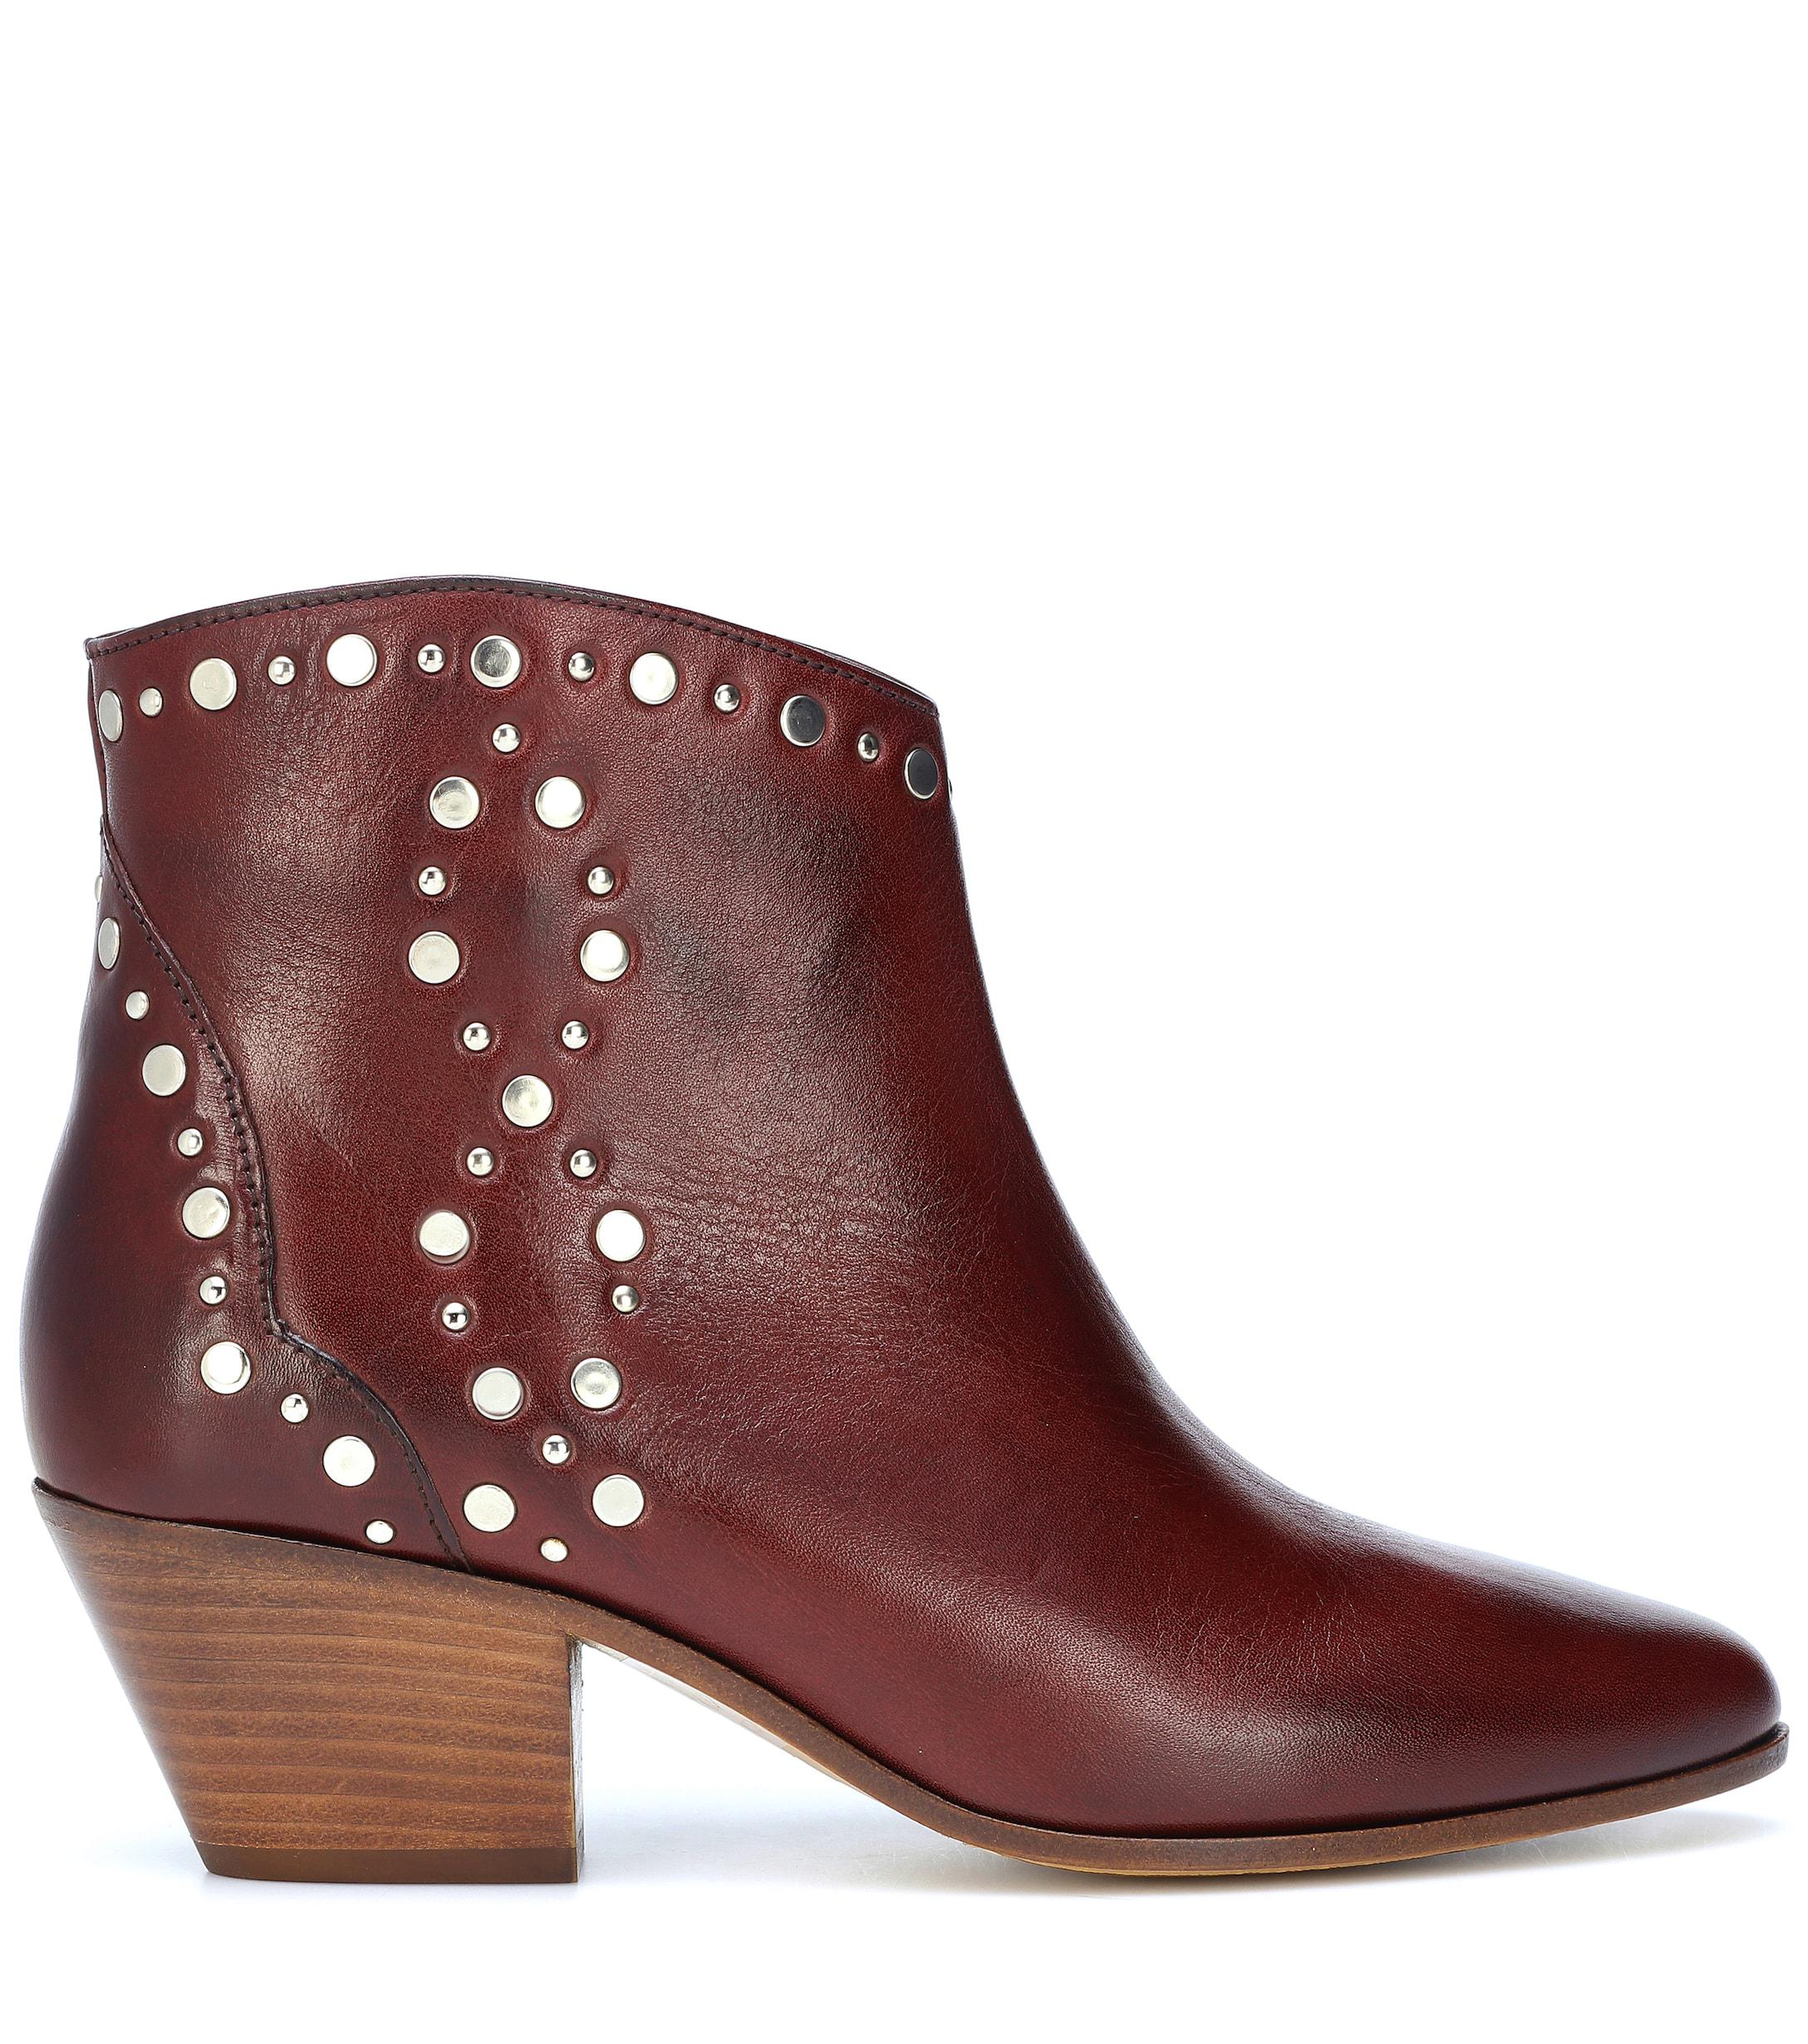 Isabel Marant Dacken Studded Leather Ankle Boots - Lyst